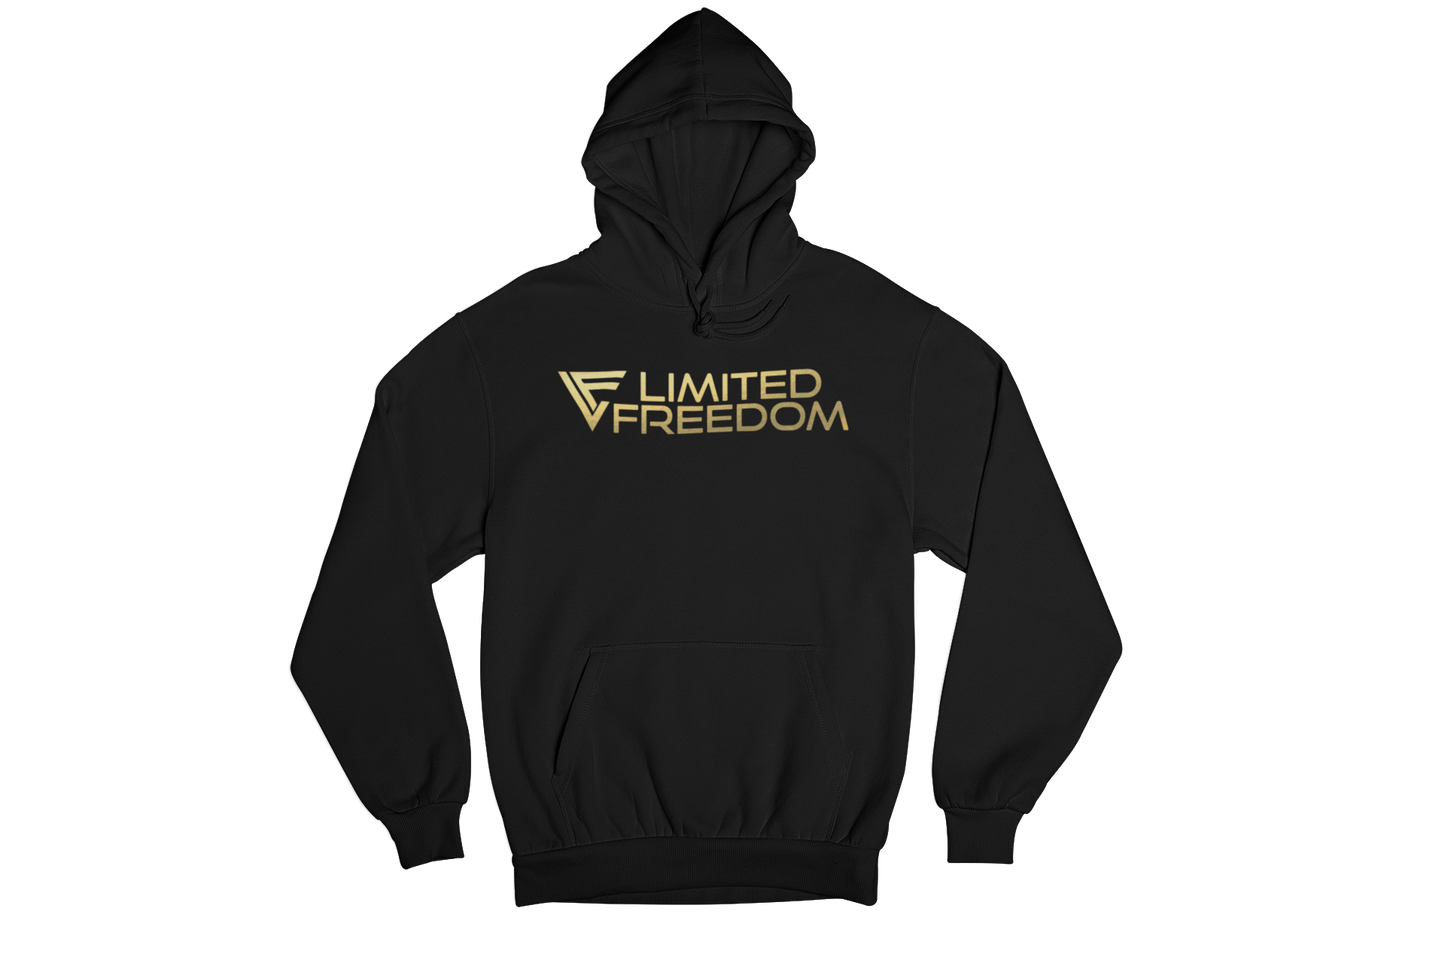 LF Limited Freedom Hooded Sweatshirt Black with Gold